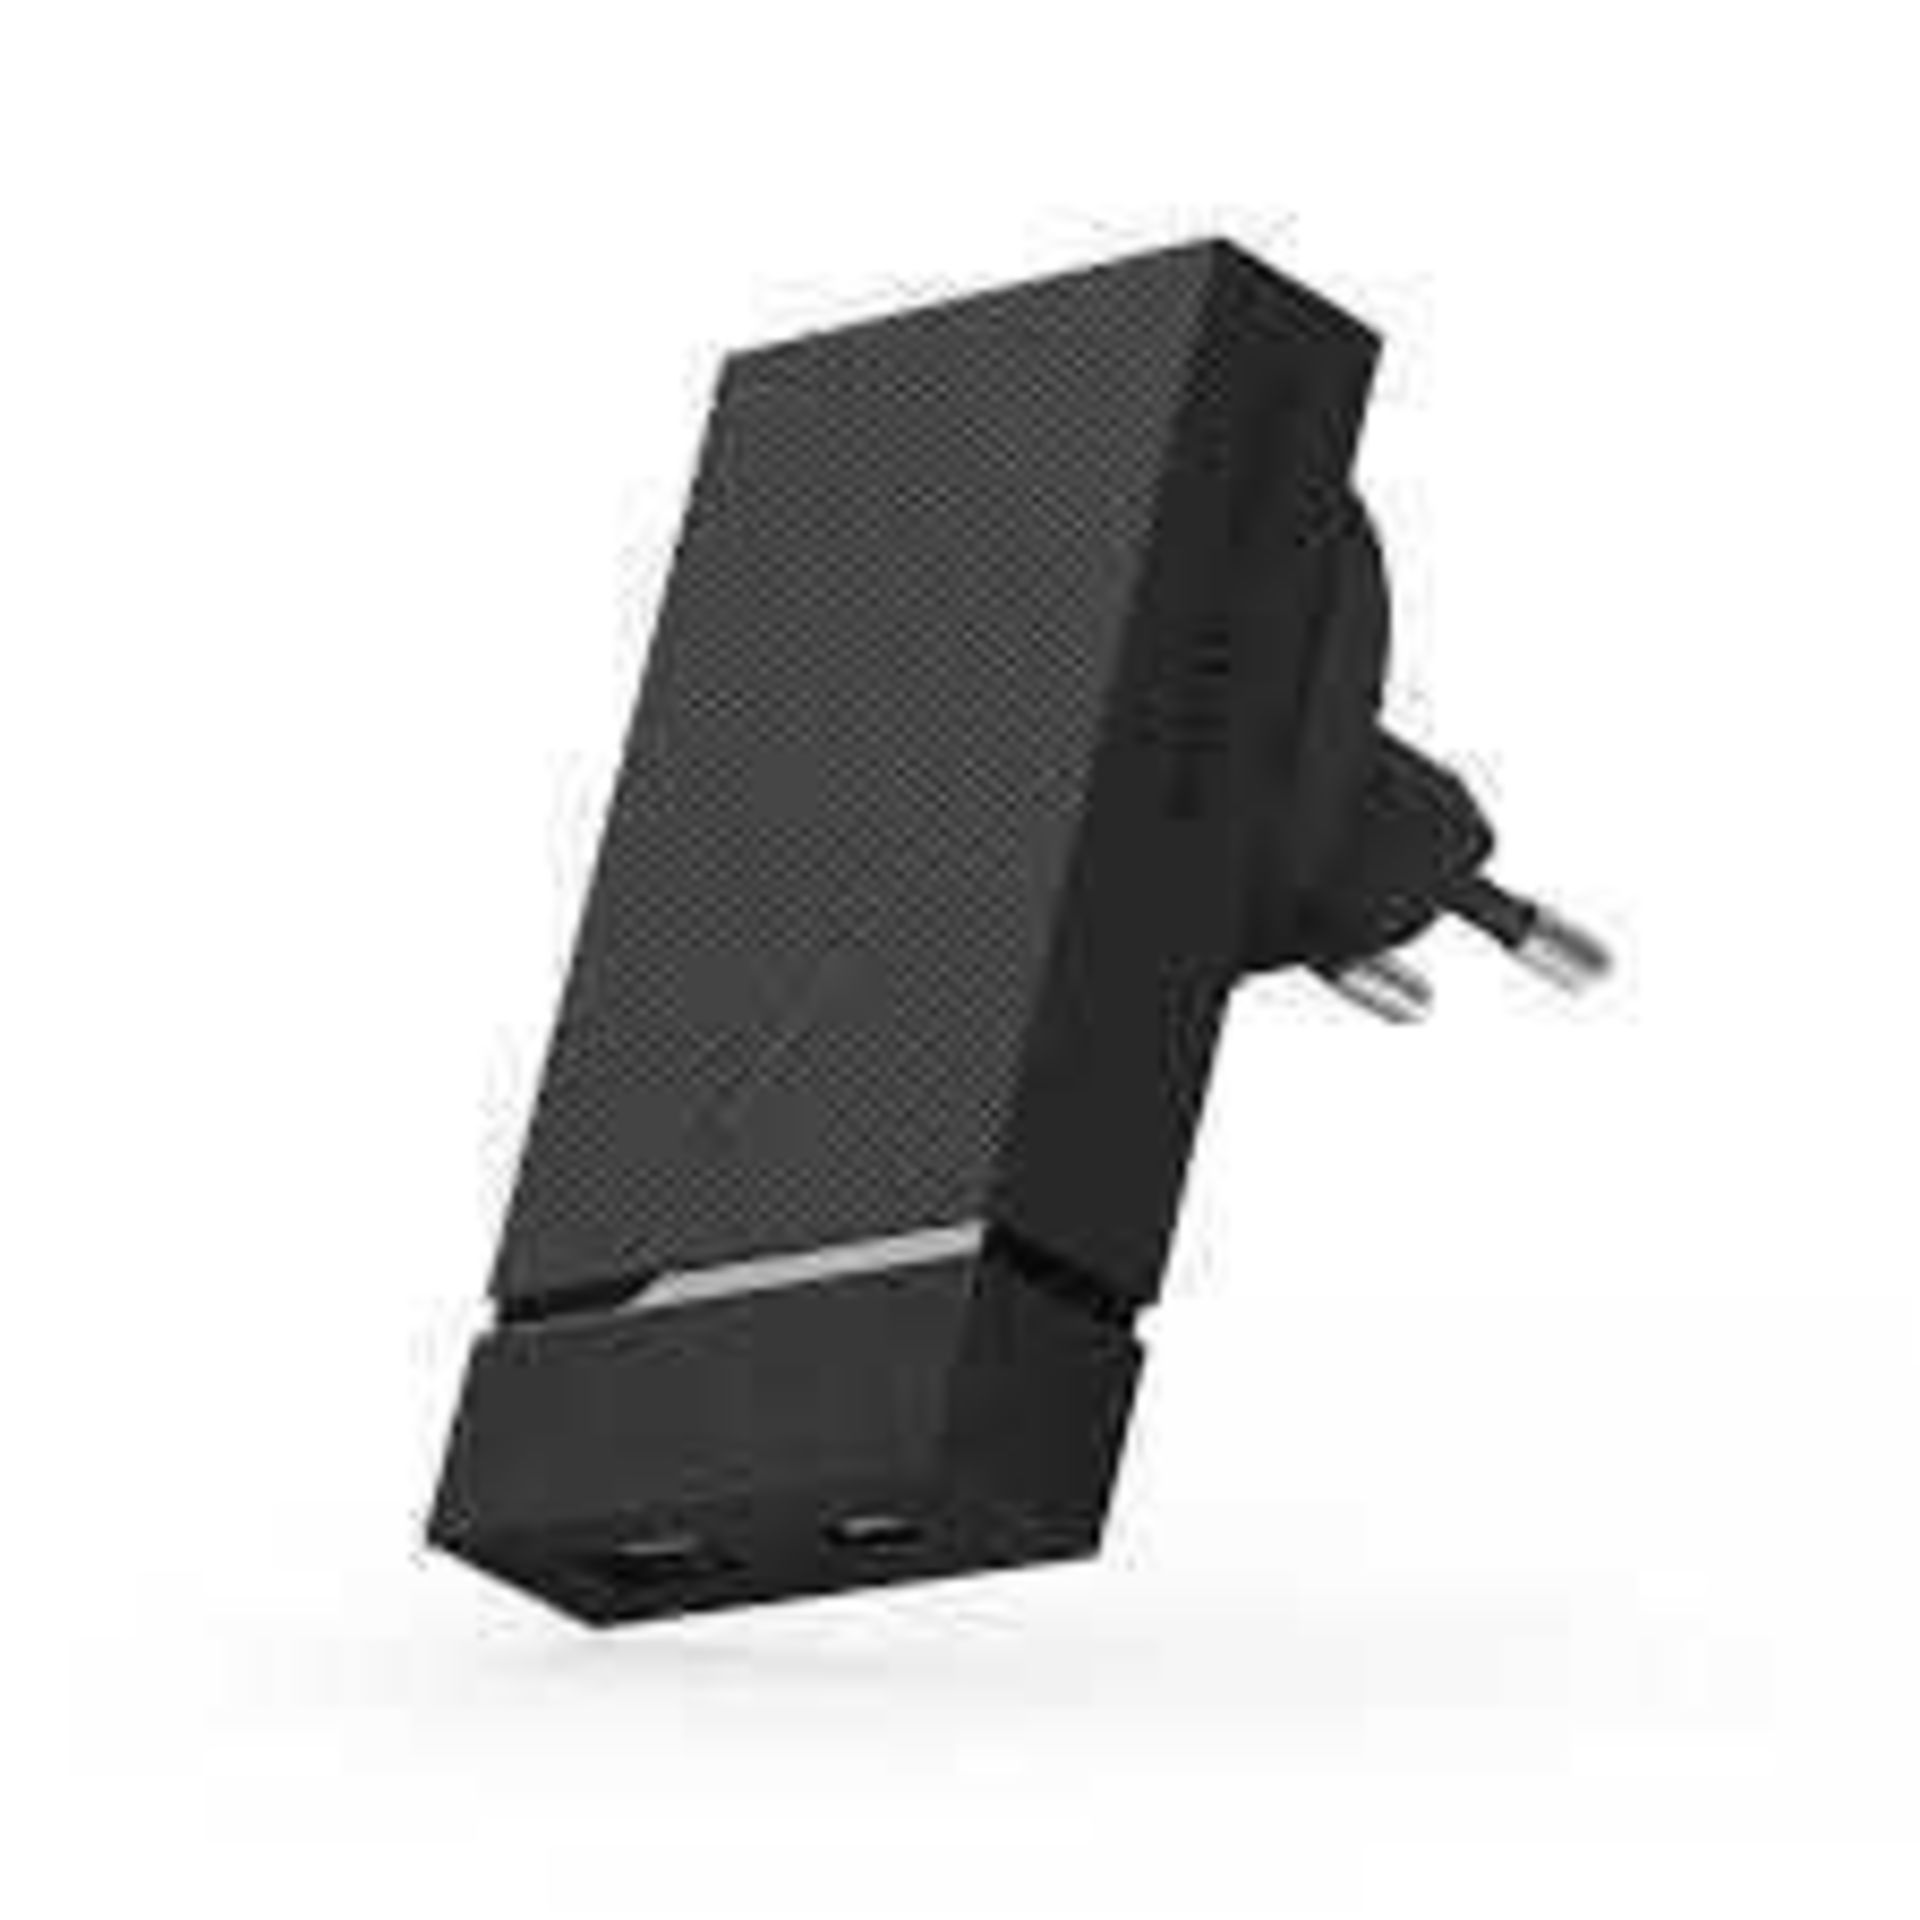 Kc) RRP £150 Lot To Contain X6 Boxed Native Union Black Smart Charger International. - Image 2 of 4